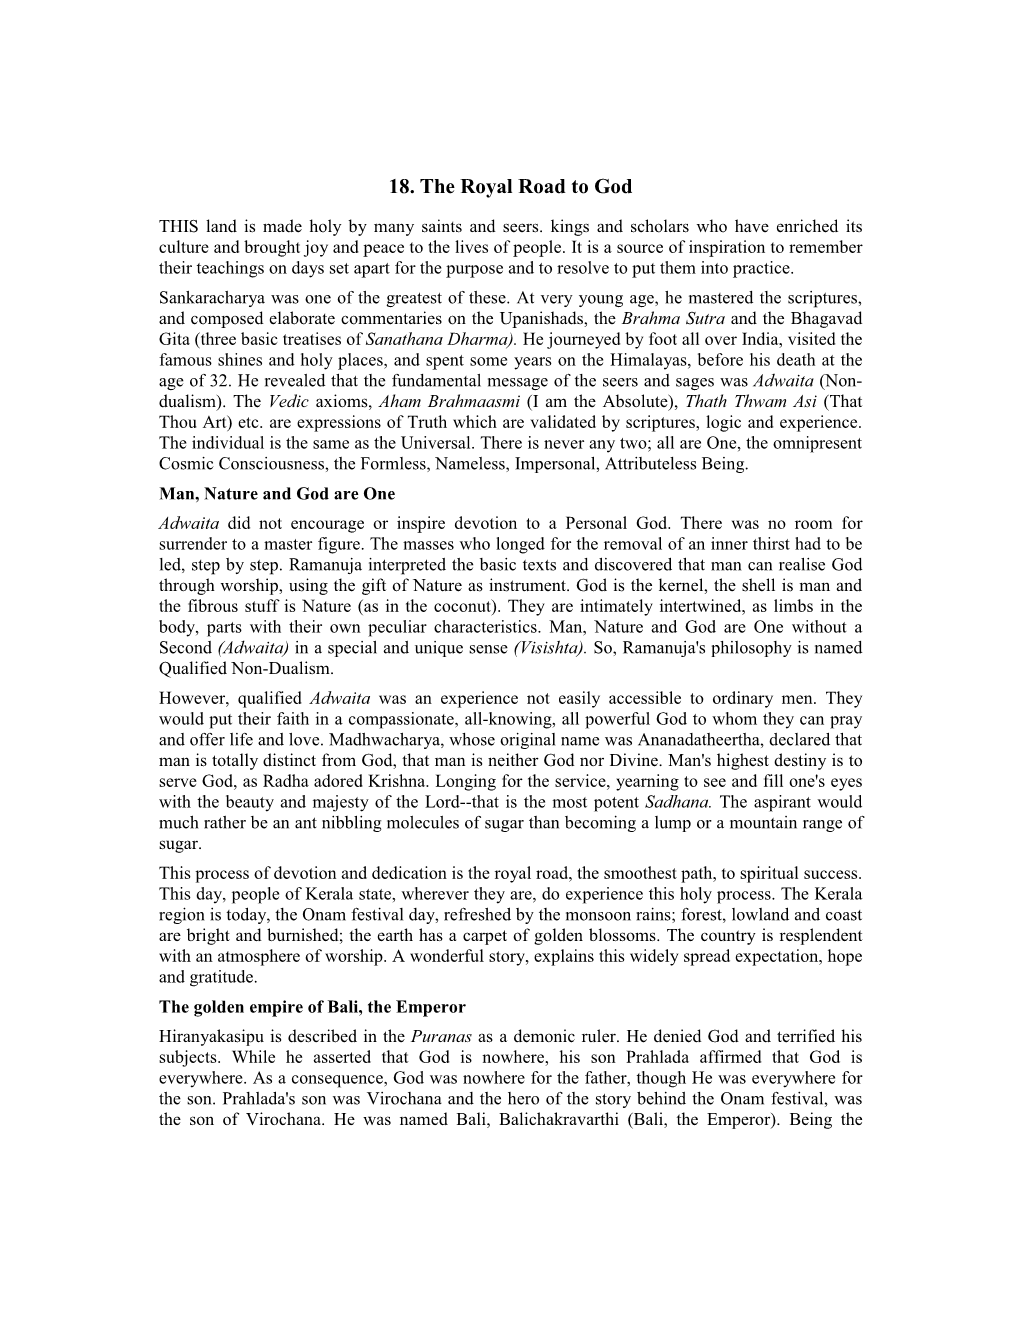 18. the Royal Road to God